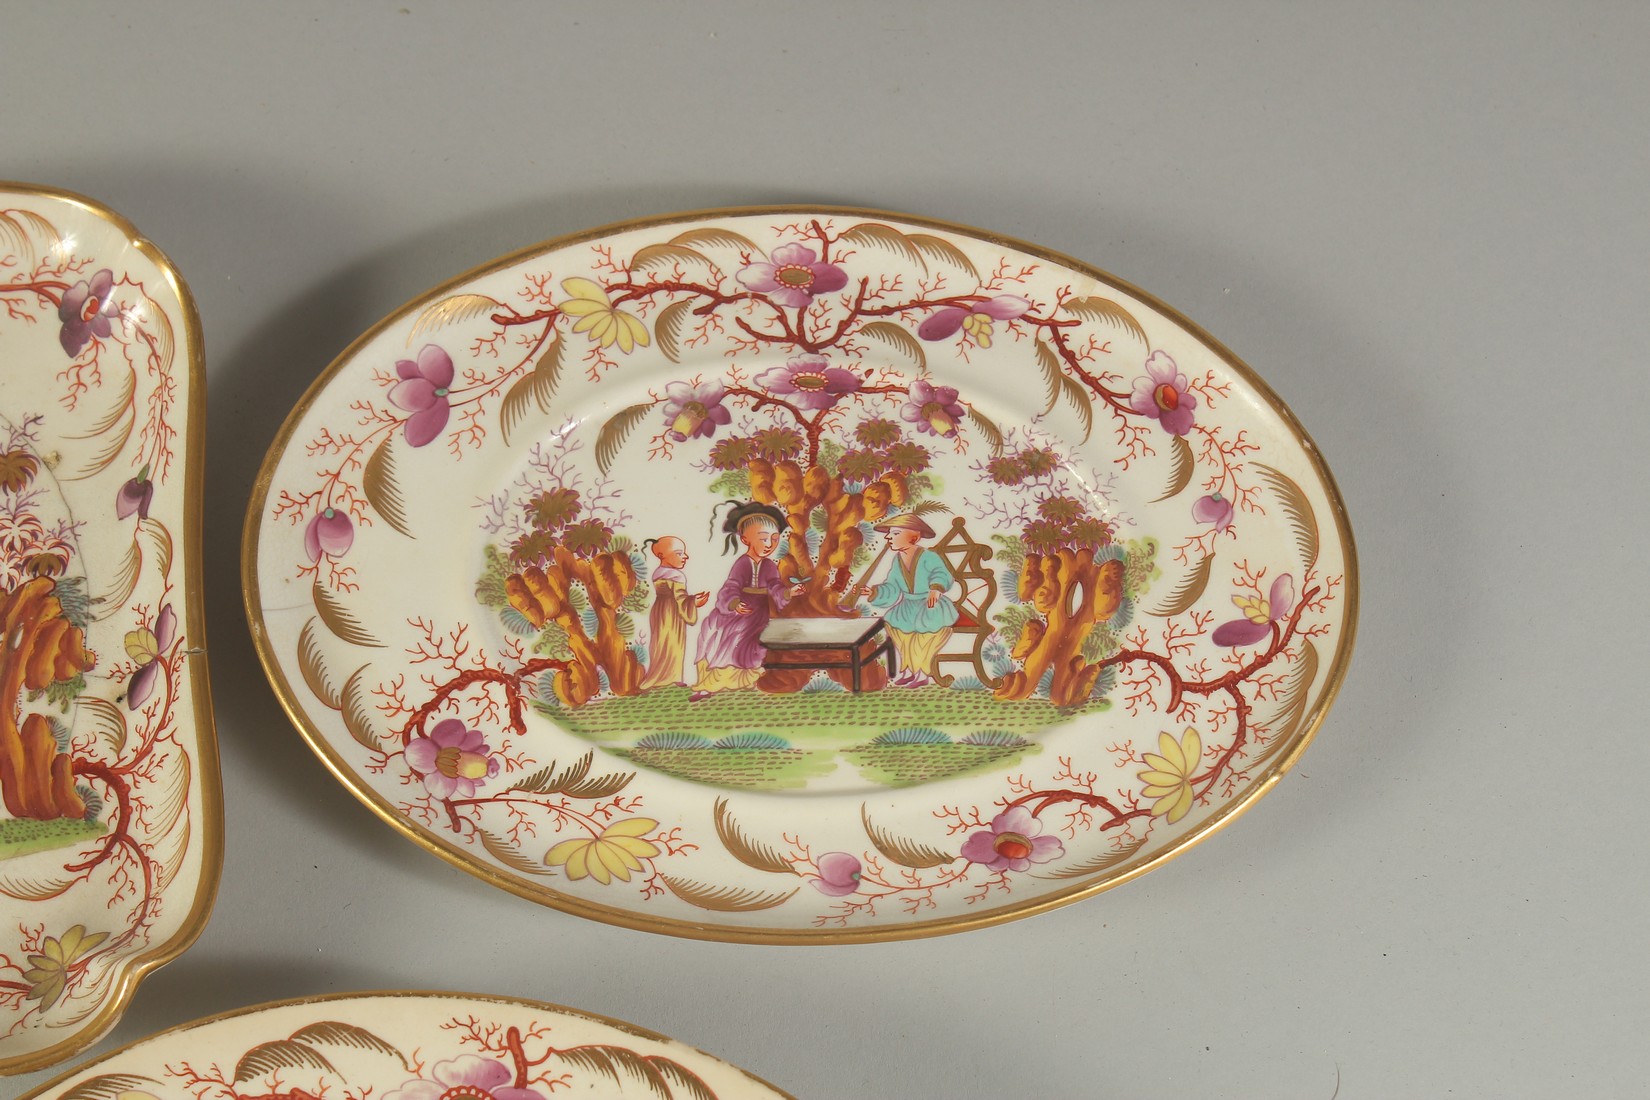 A PAIR OF LONGPORT CIRCULAR PLATES with Chinese design, 9ins diameter. Pair of oval dishes, 8ins - Image 4 of 7